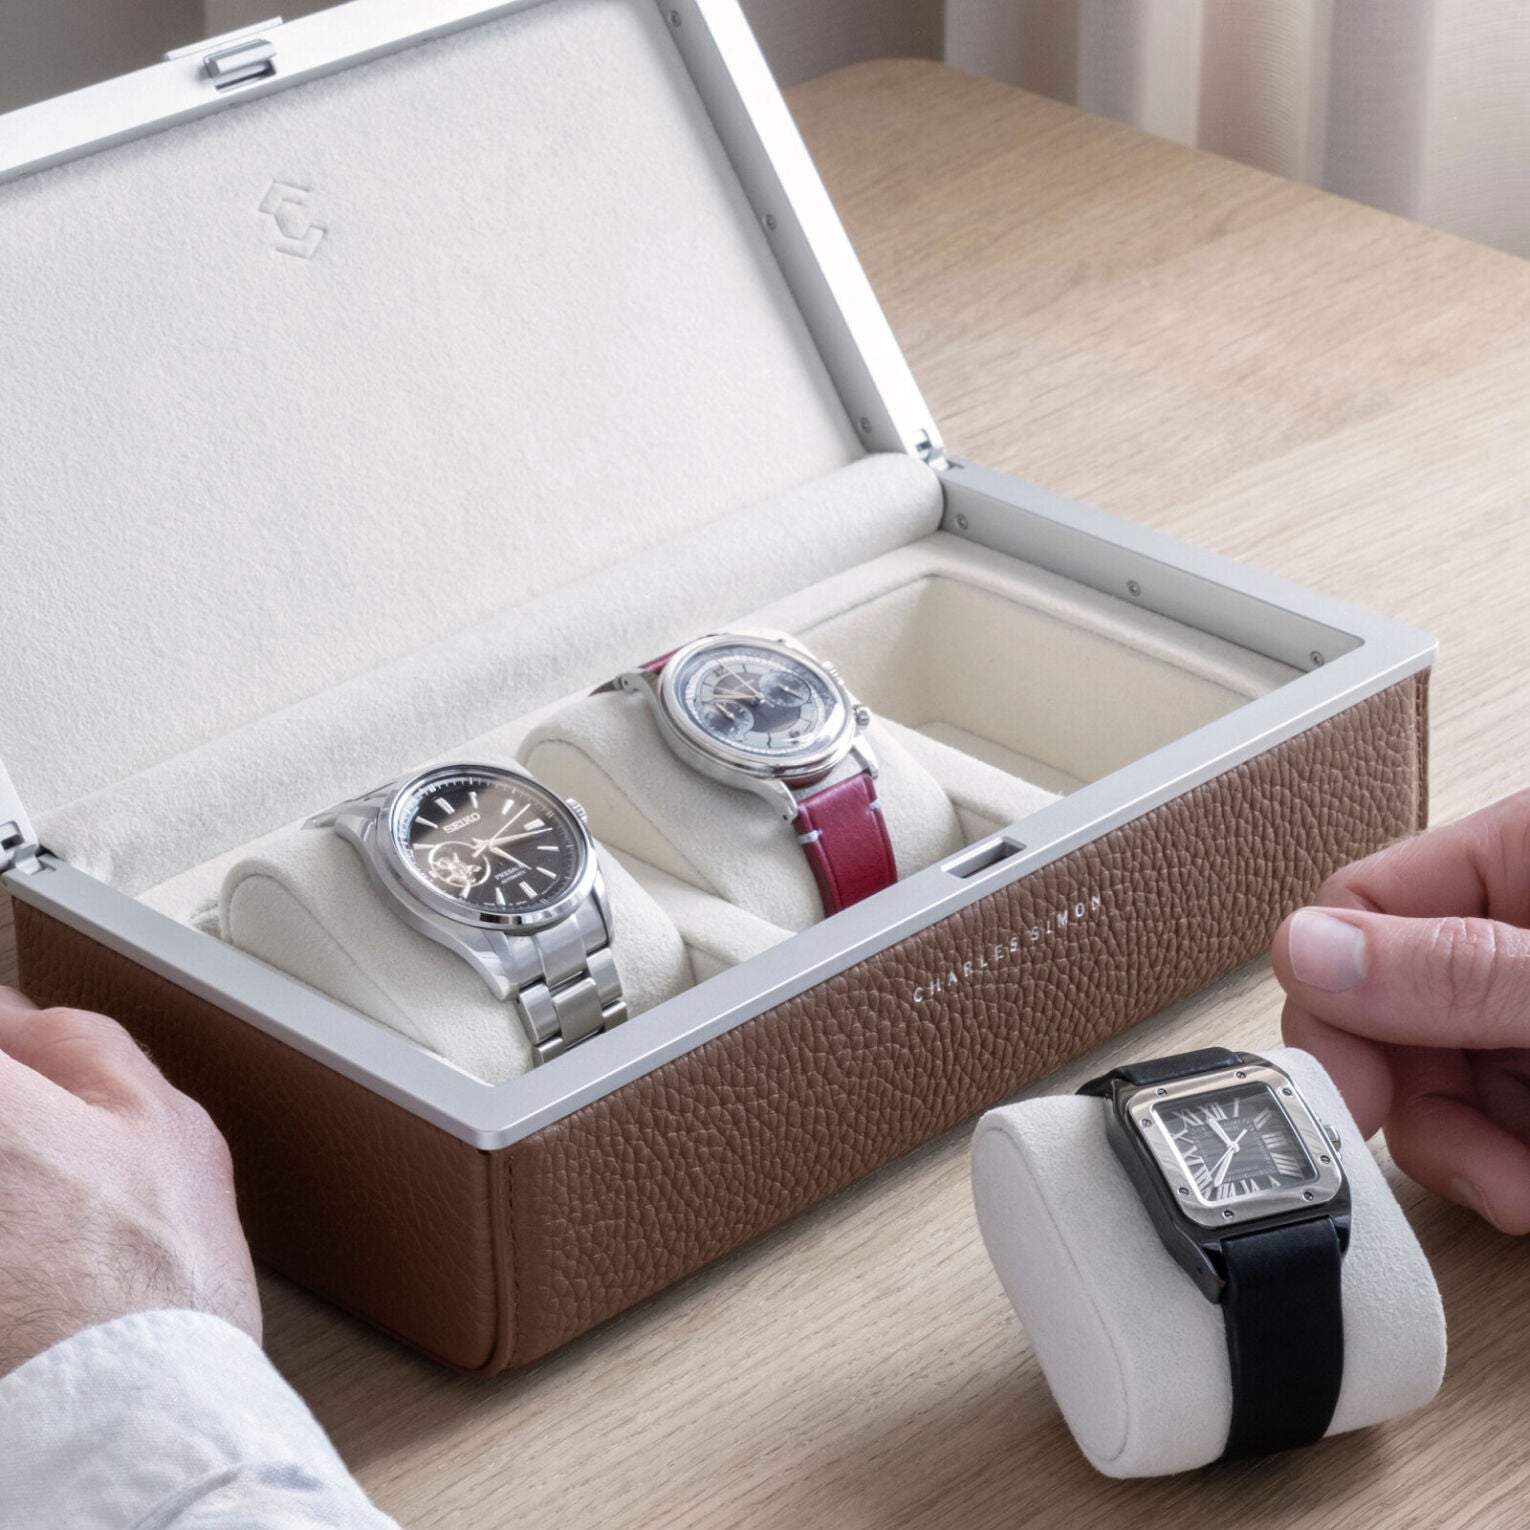 spence 6, eaton 3 and theo roll by Charles Simon, guide on proper selection of watch case / box